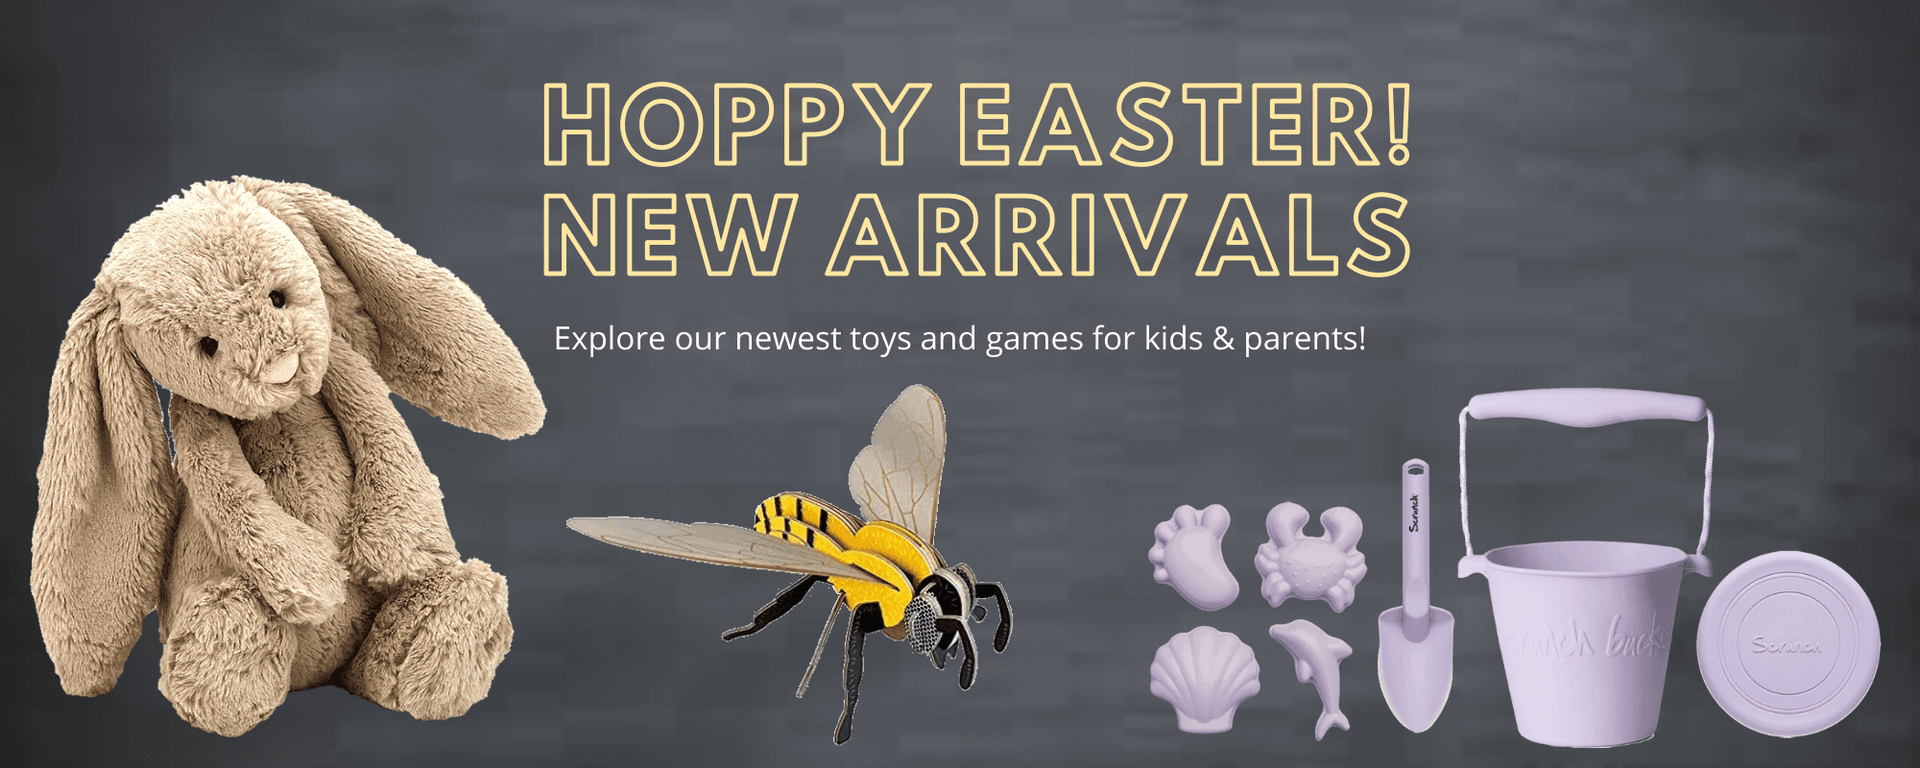 Easter Holiday Events at Wigwam Toys - Wigwam Toys Brighton